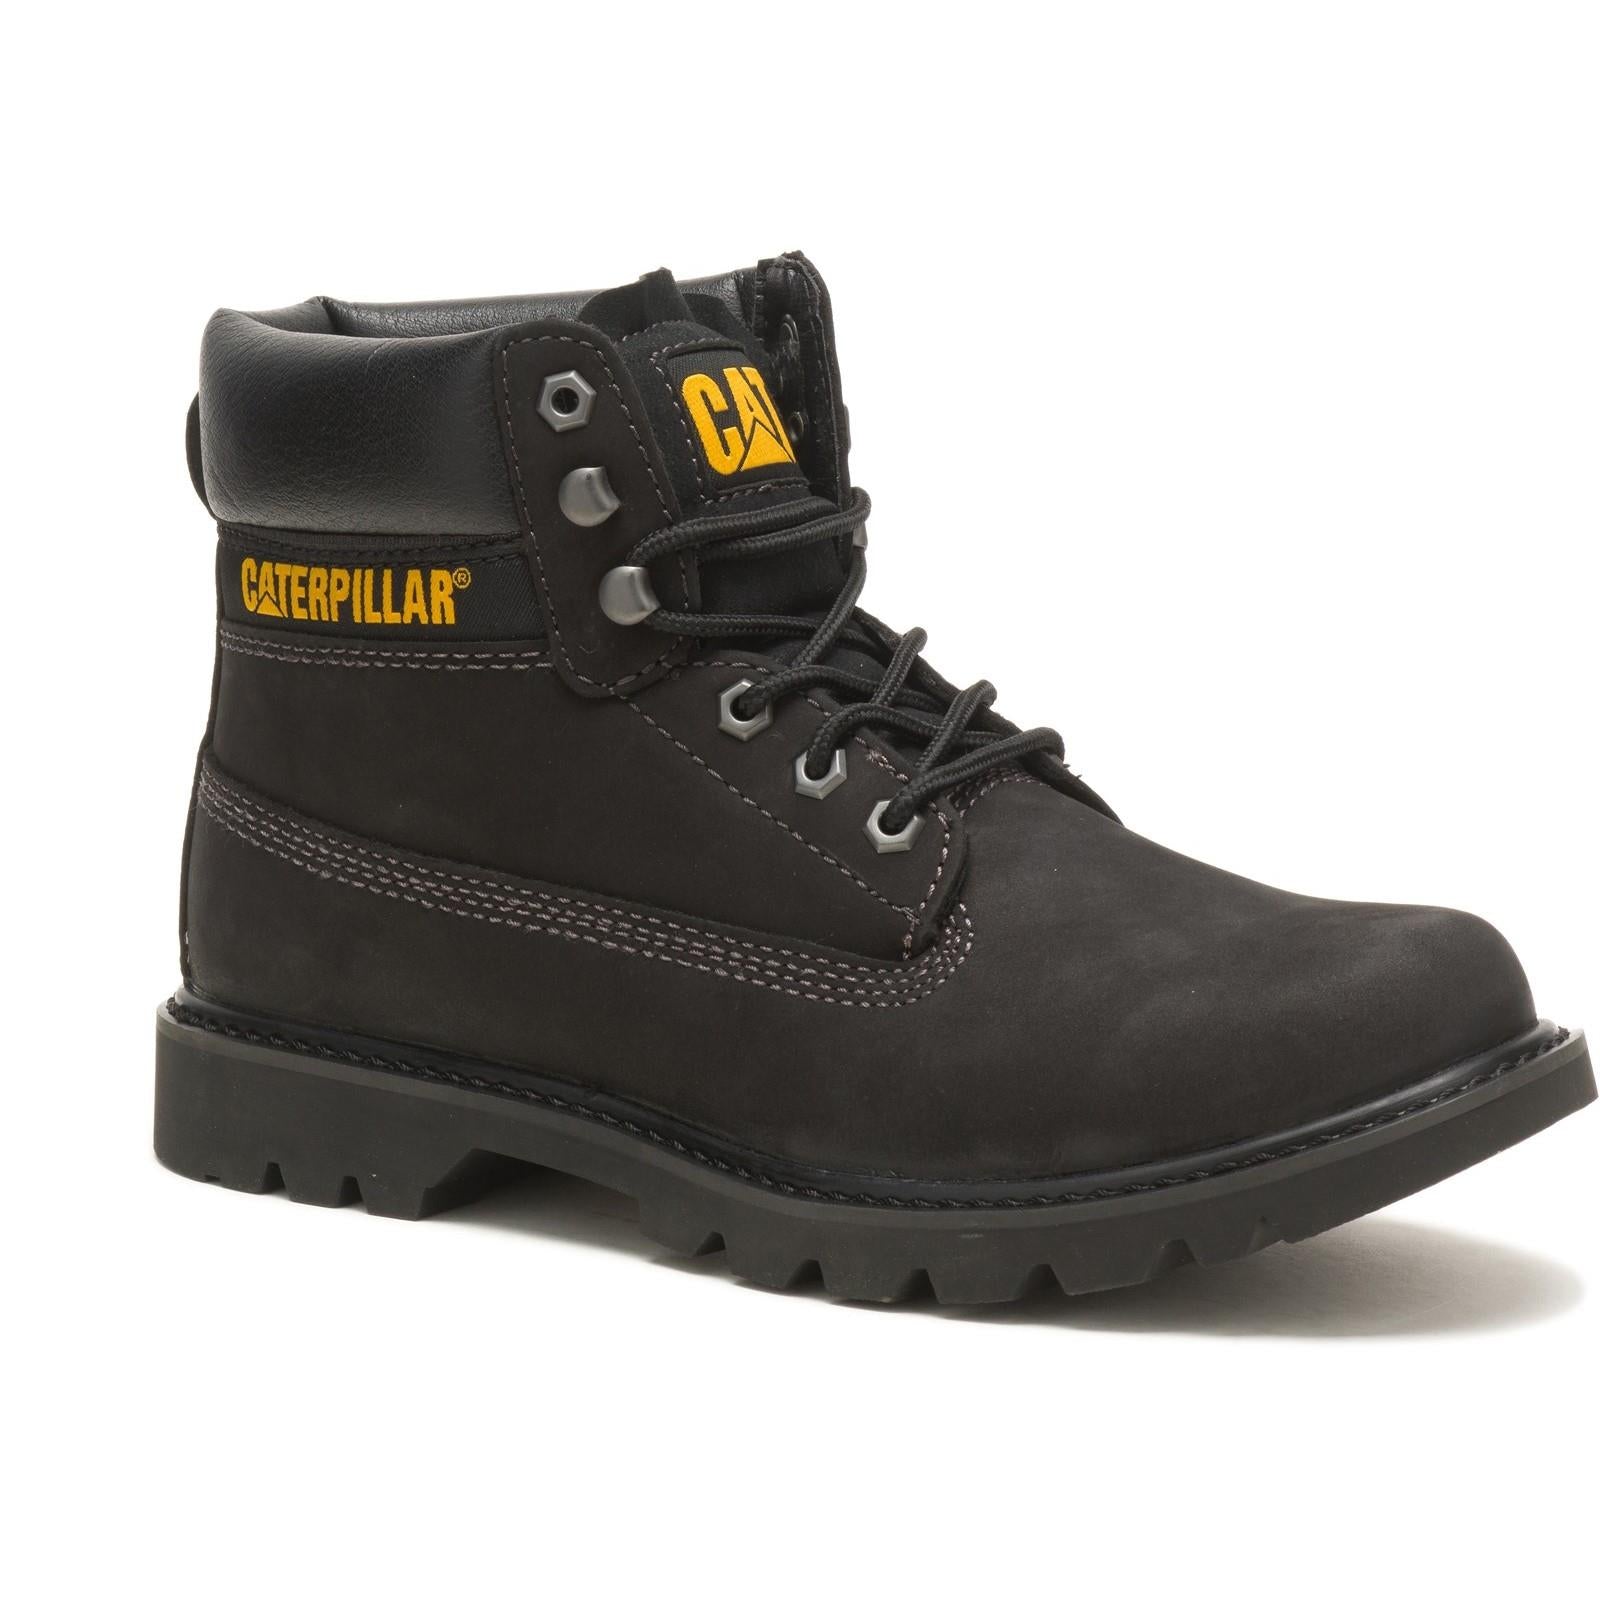 Caterpillar CAT Lifestyle Colorado 2.0 black leather lace up boots